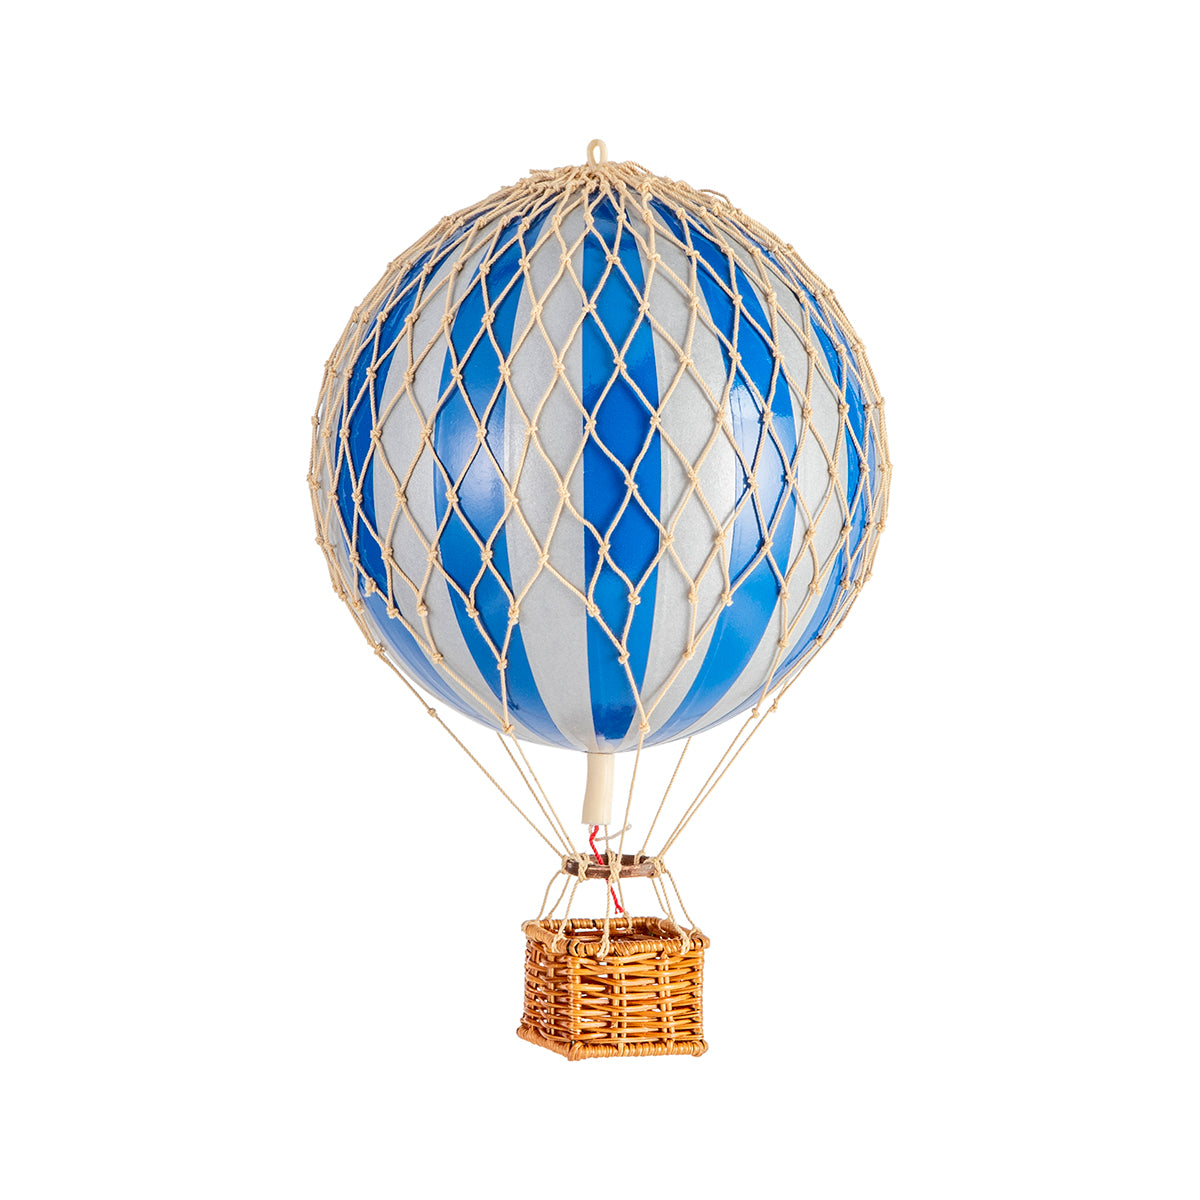 A quirky Wonderen Small Hot Air Balloon - Travels Light on a white background.